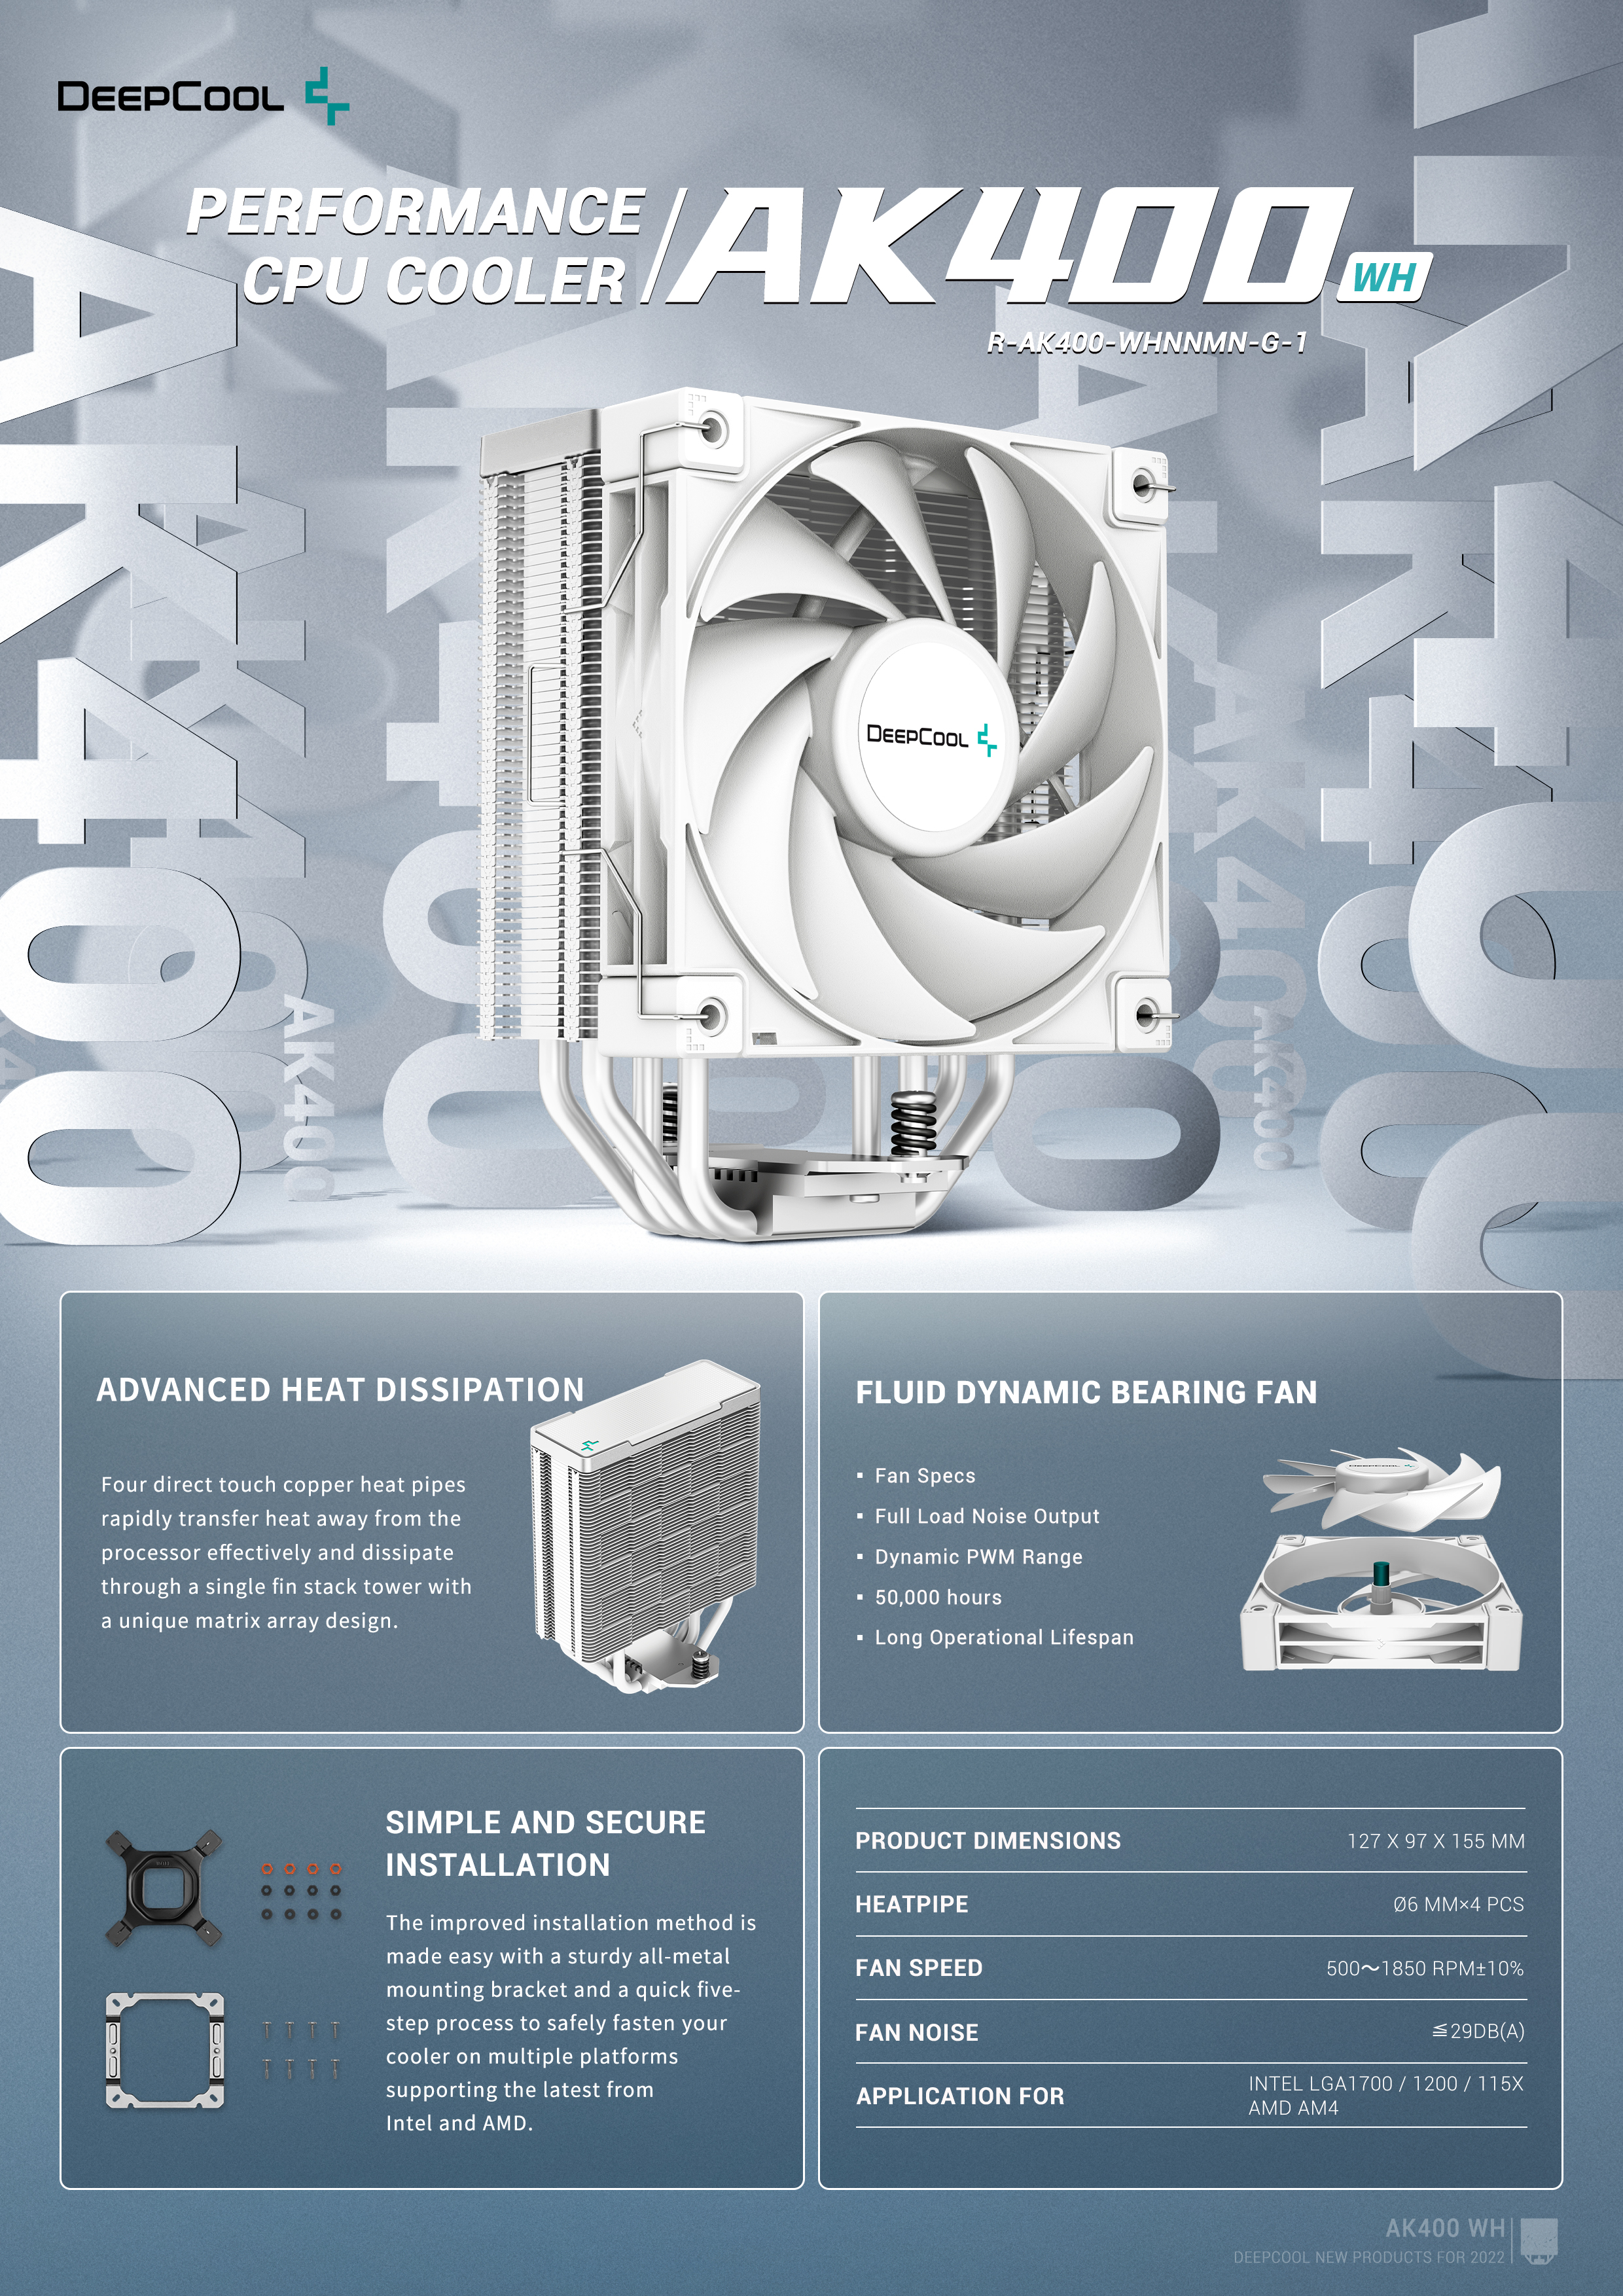 A large marketing image providing additional information about the product DeepCool AK400 CPU Cooler - White - Additional alt info not provided